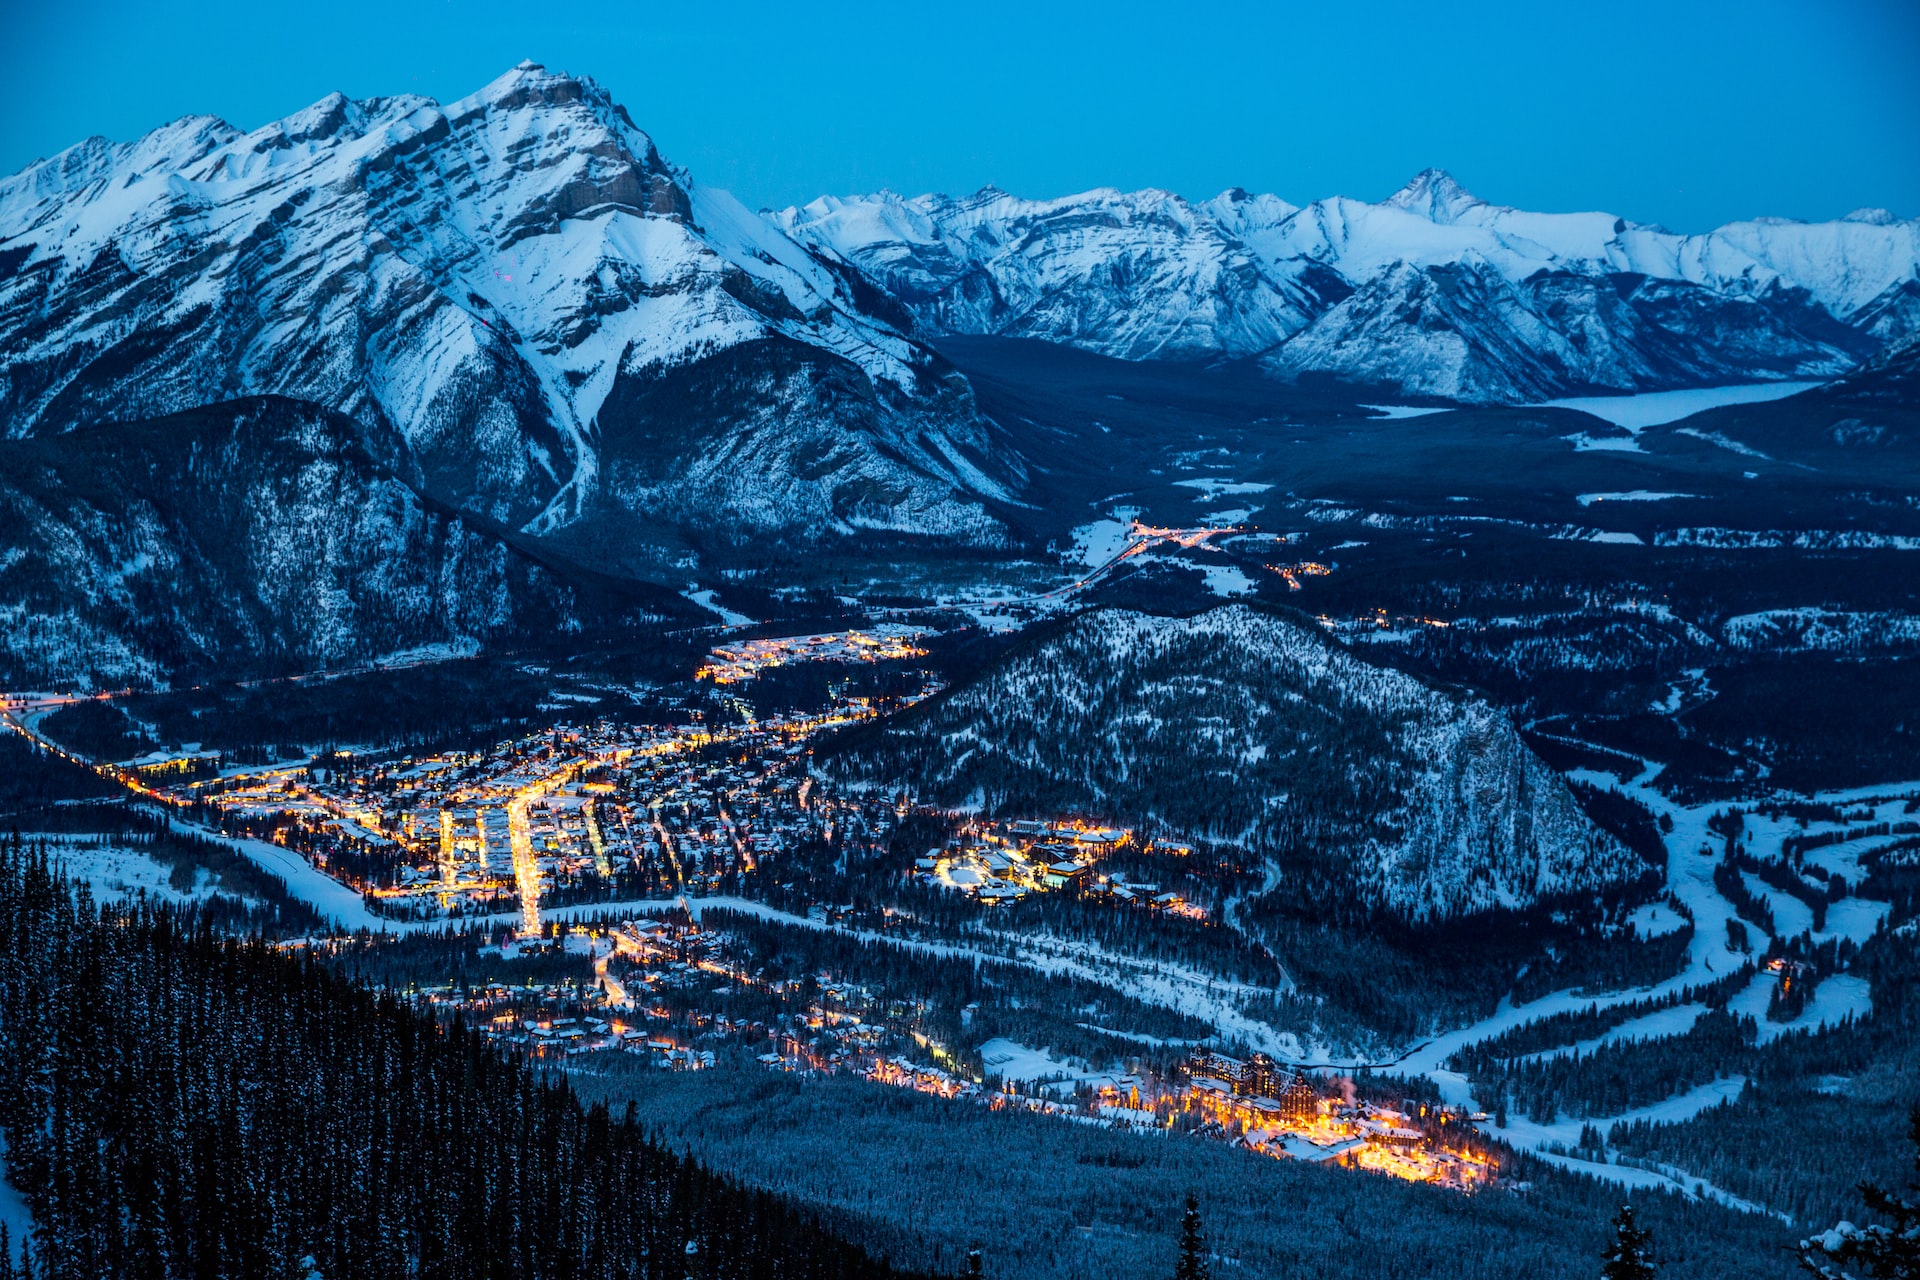 Bird's eye view of the town of Banff at night.